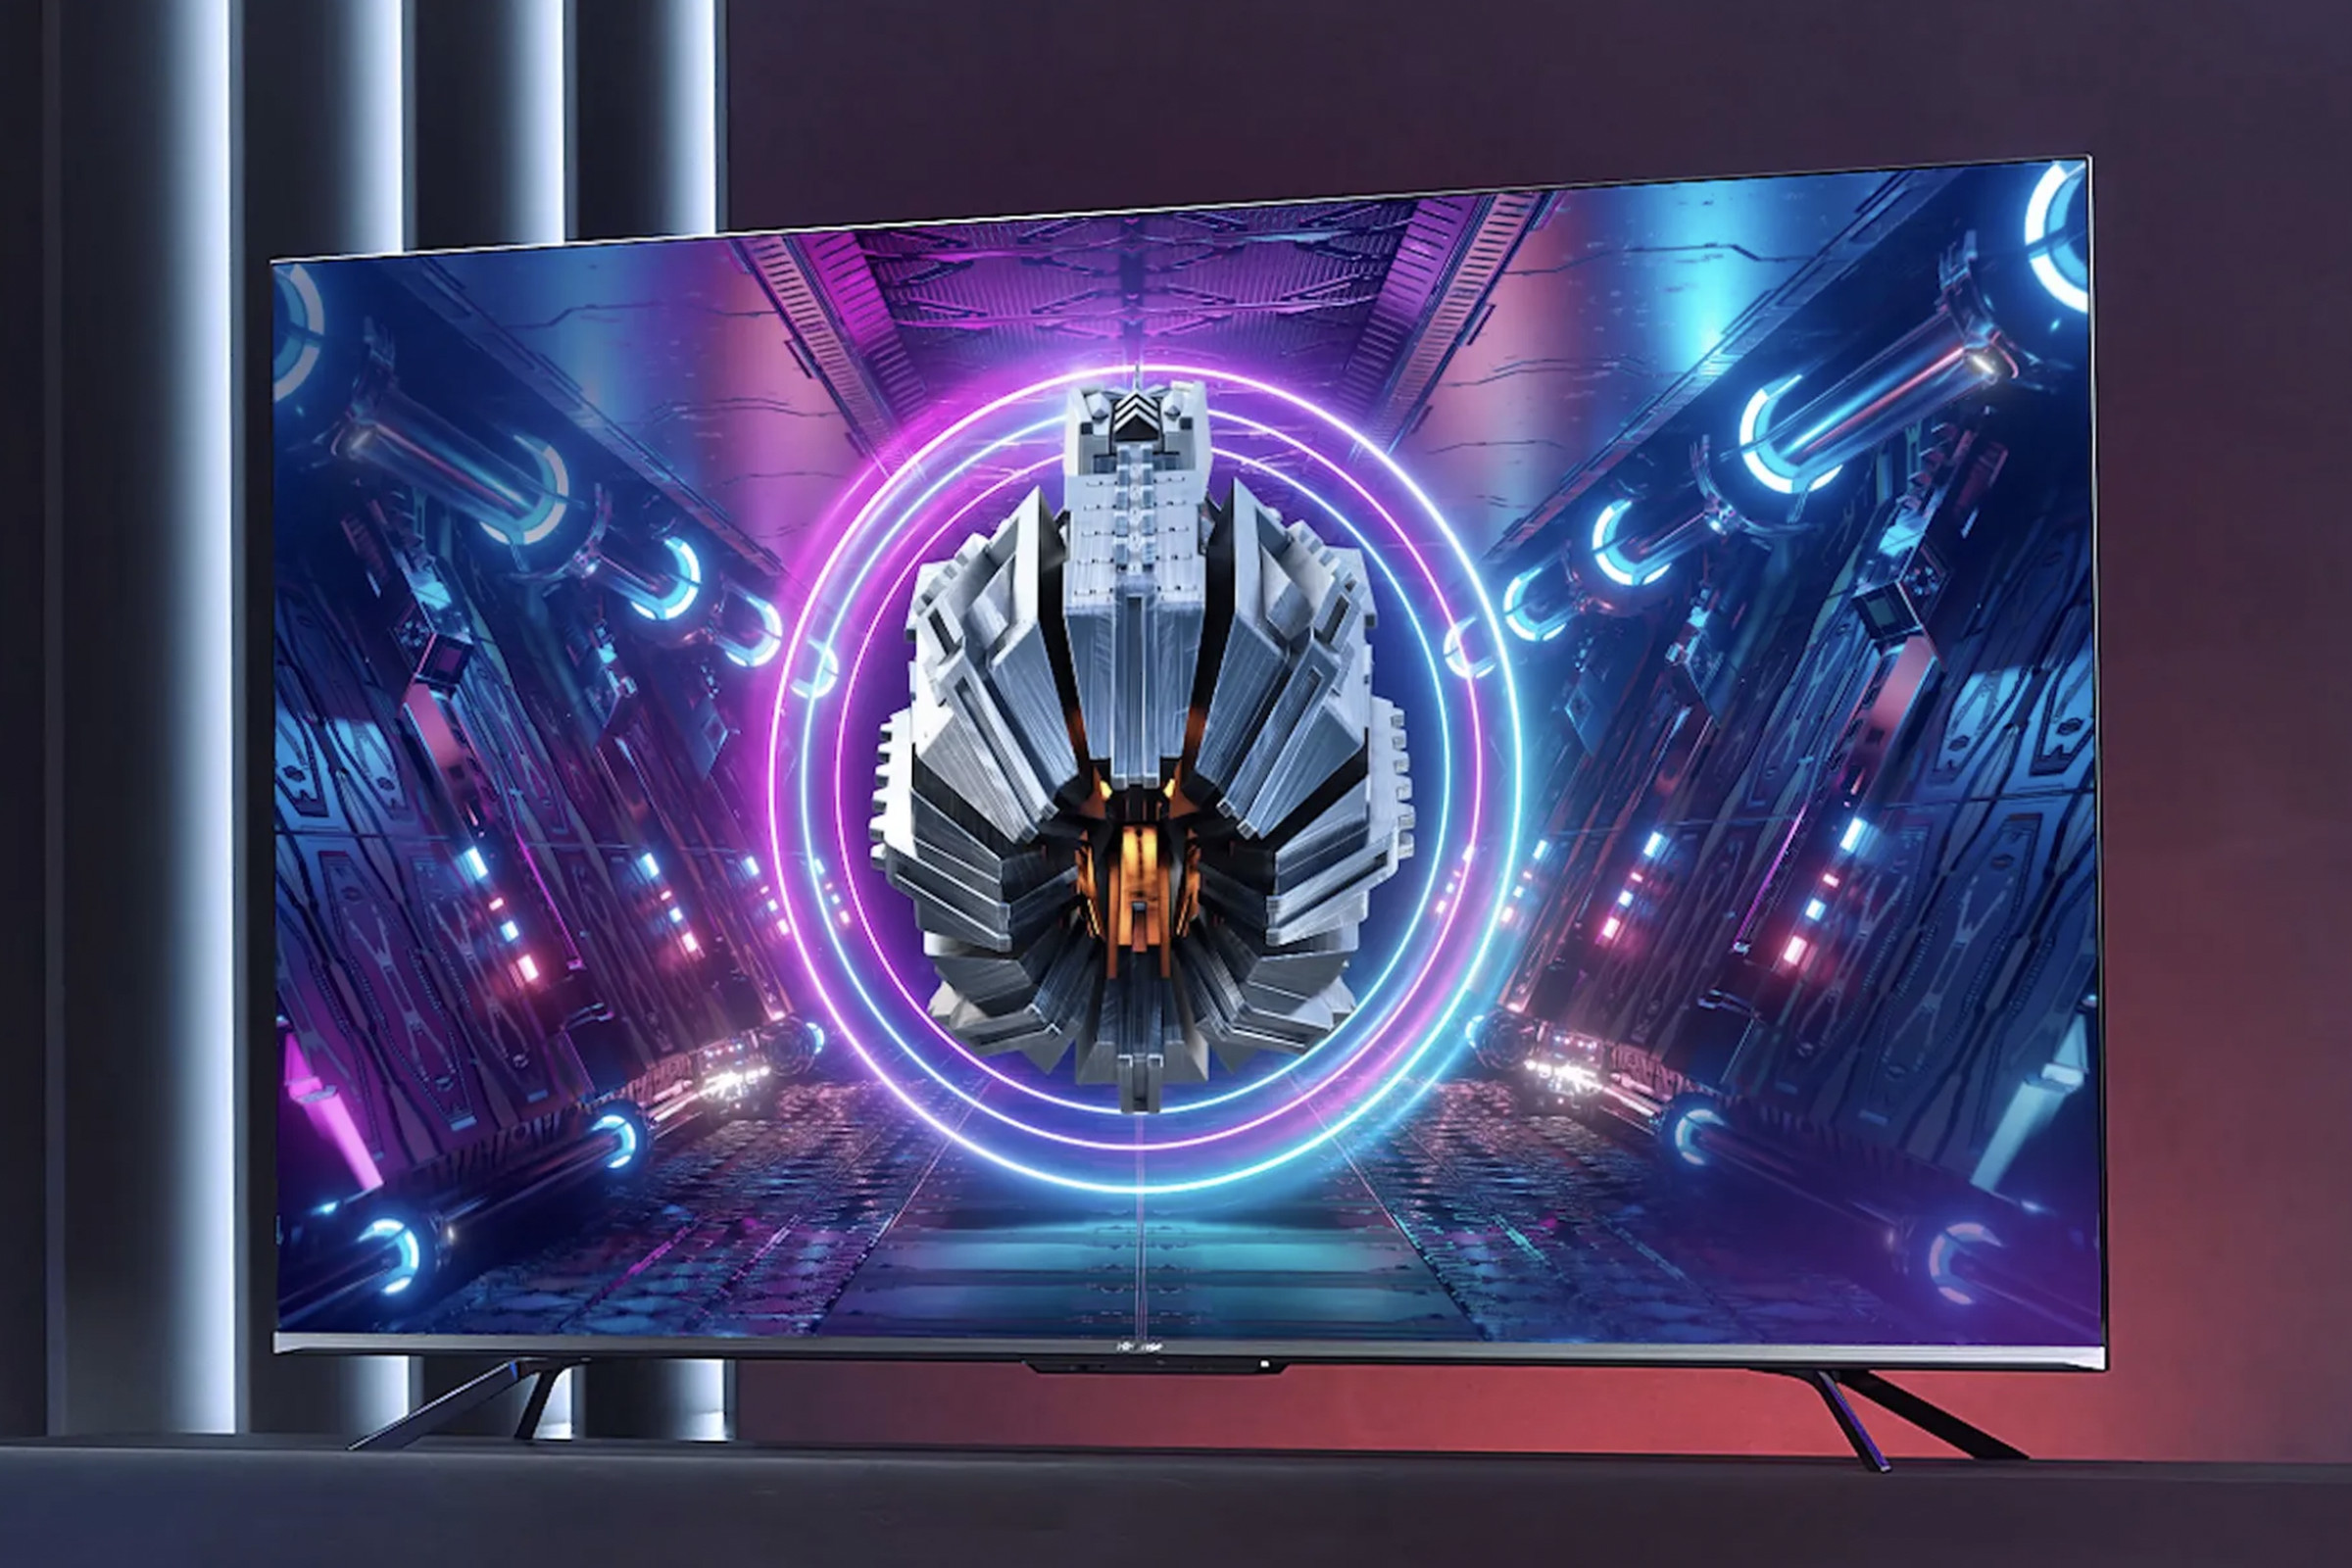 Hisense’s U7G Series TV offers a 120Hz refresh rate and support for Dolby Vision.